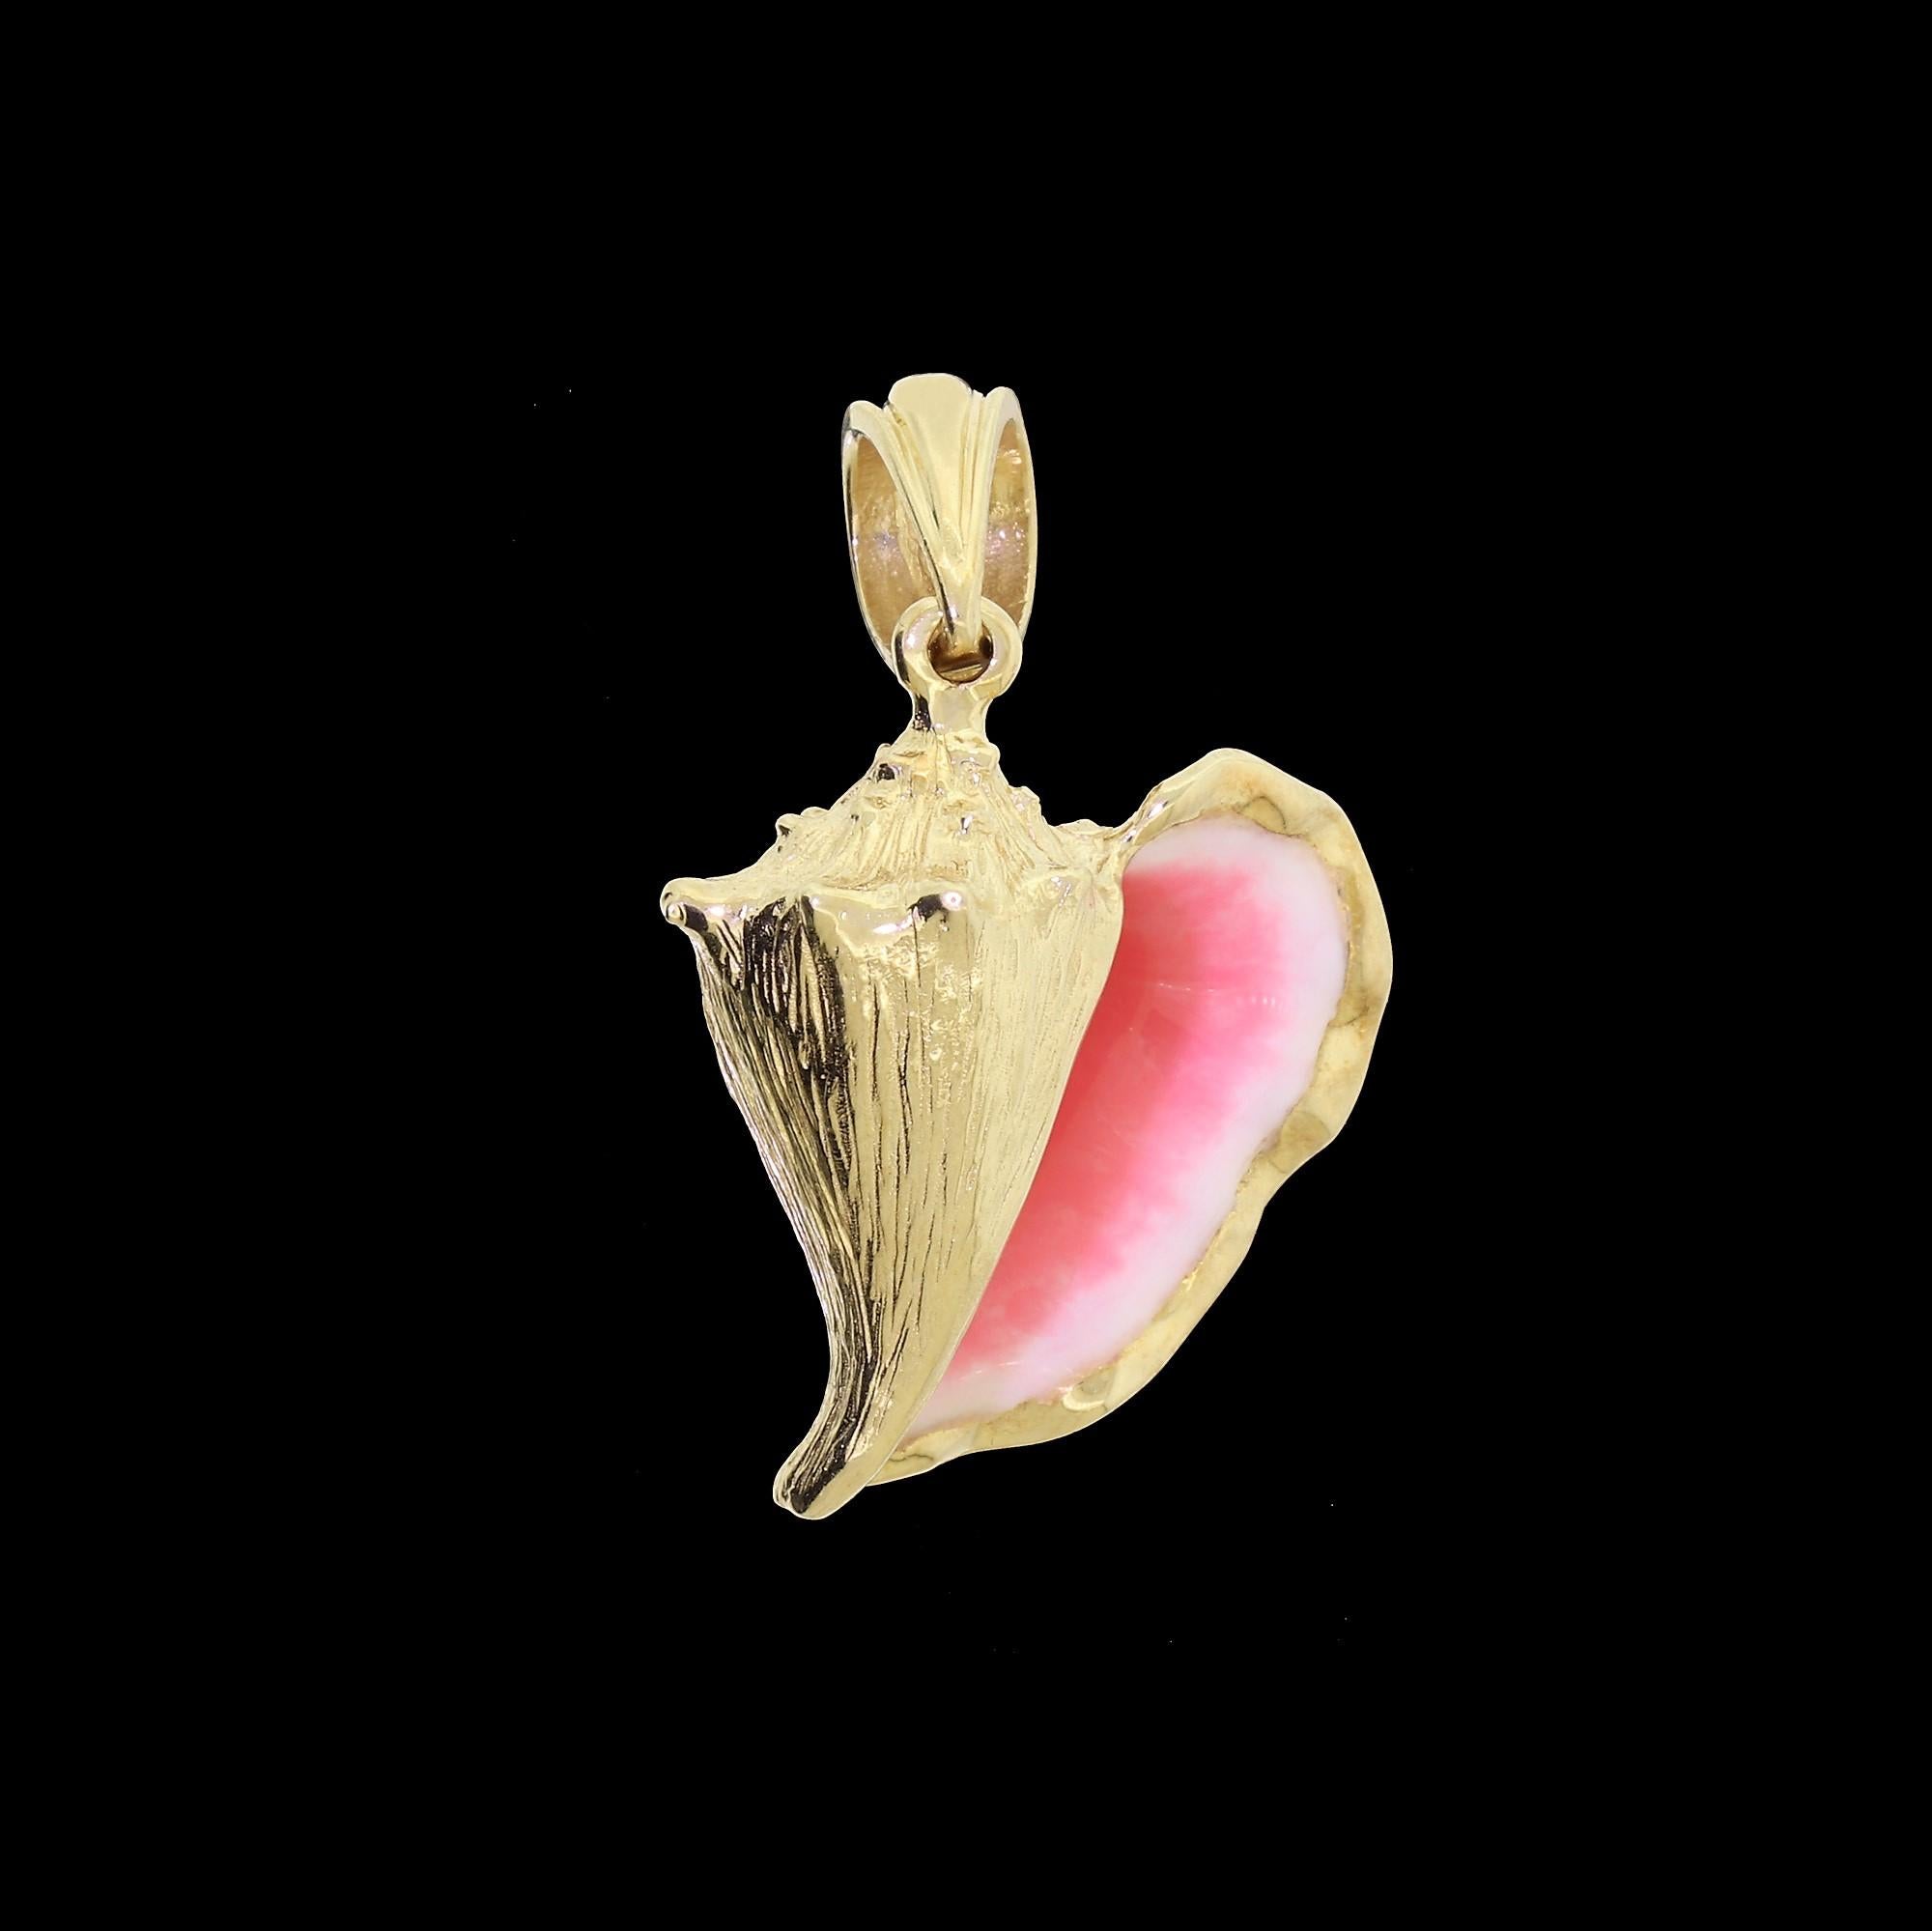 queen conch shell jewellery